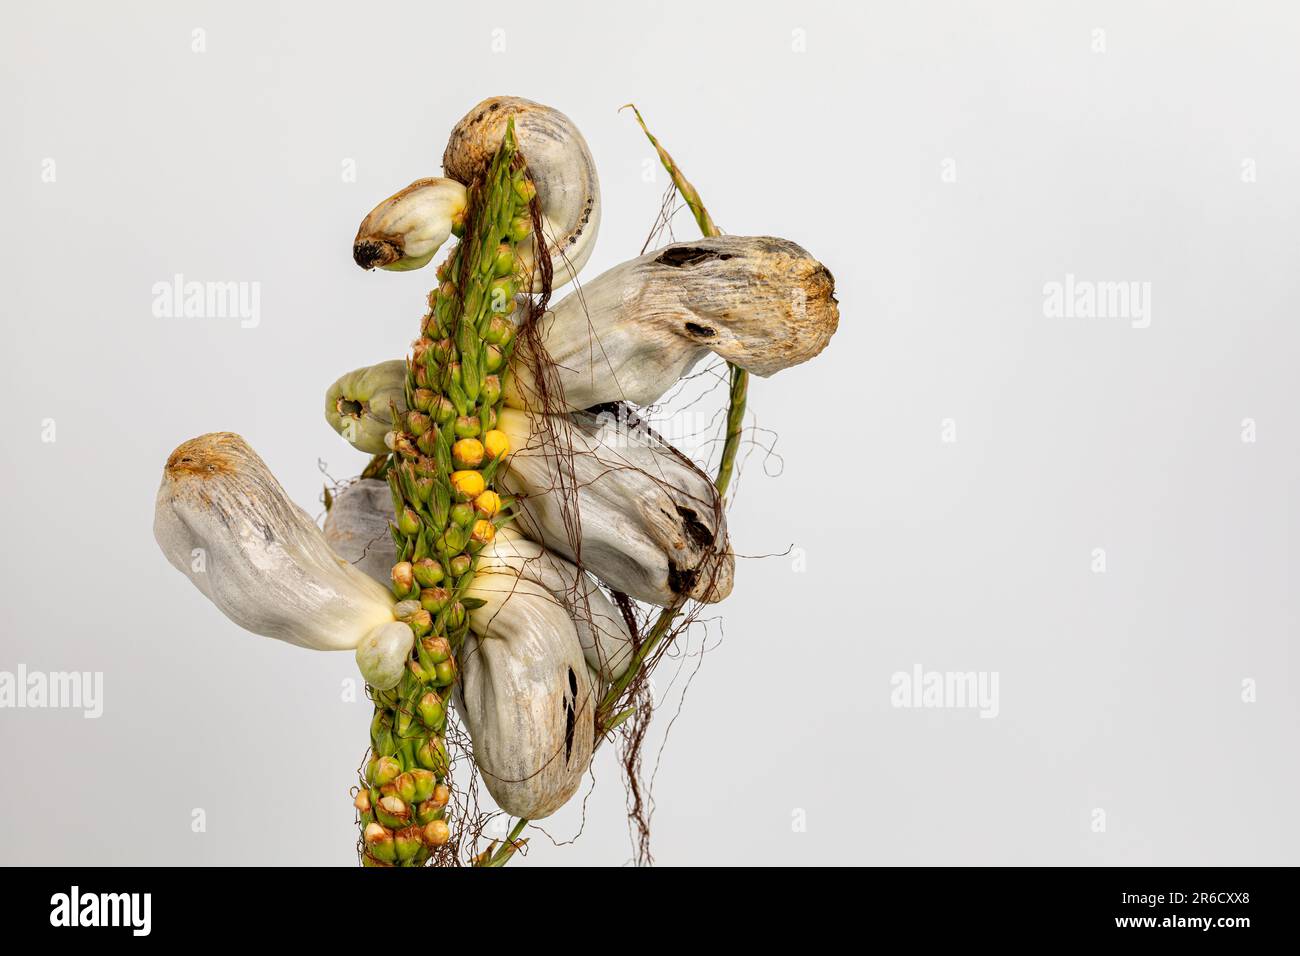 Corn smut galls on tassel of cornstalk isolated on white background. Farming, agriculture and plant disease concept. Stock Photo